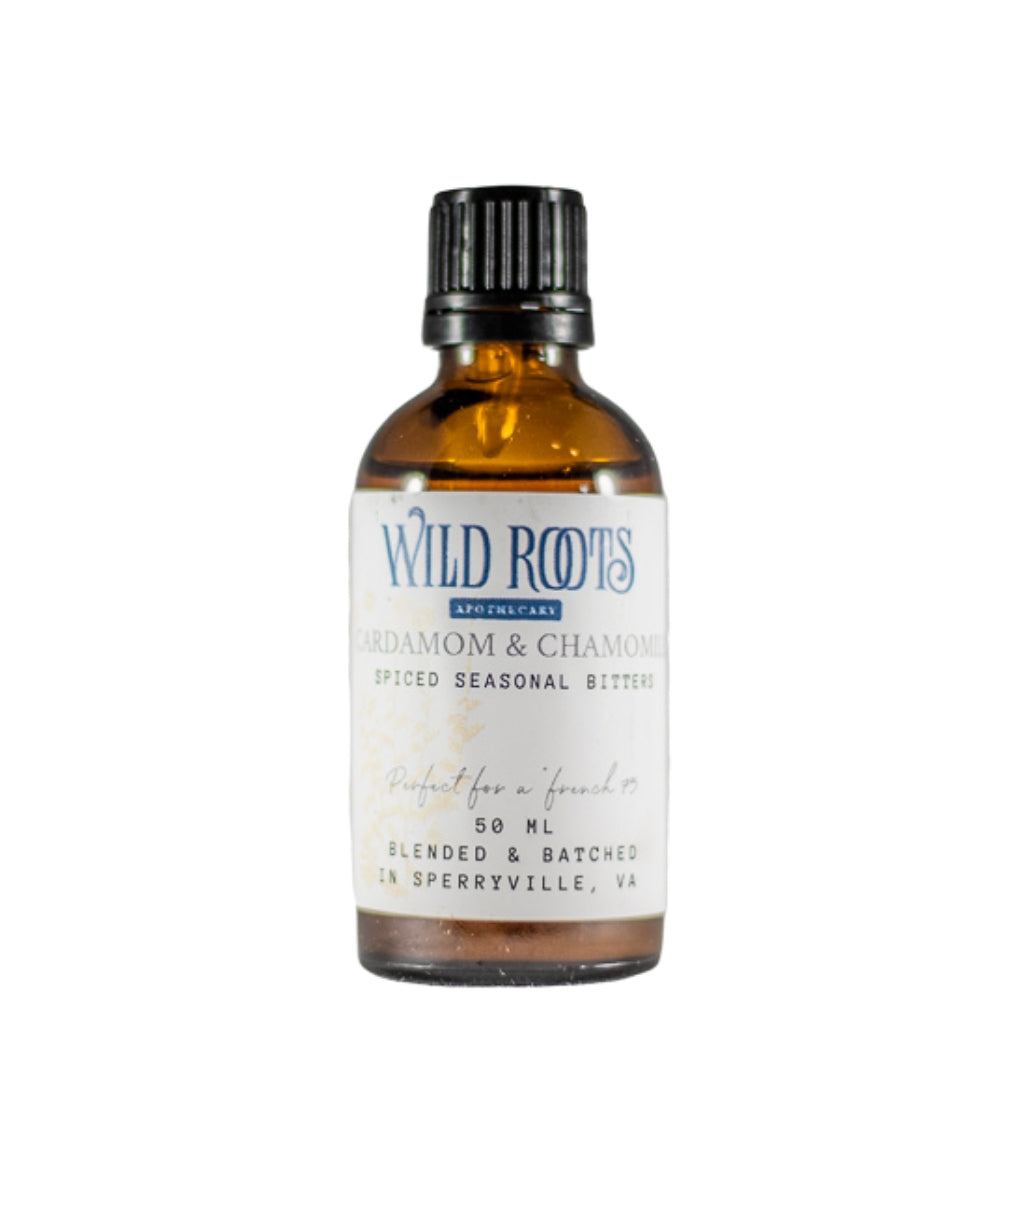 Cardamom &amp; Chamomile Bitters—Wild Roots Apothecary